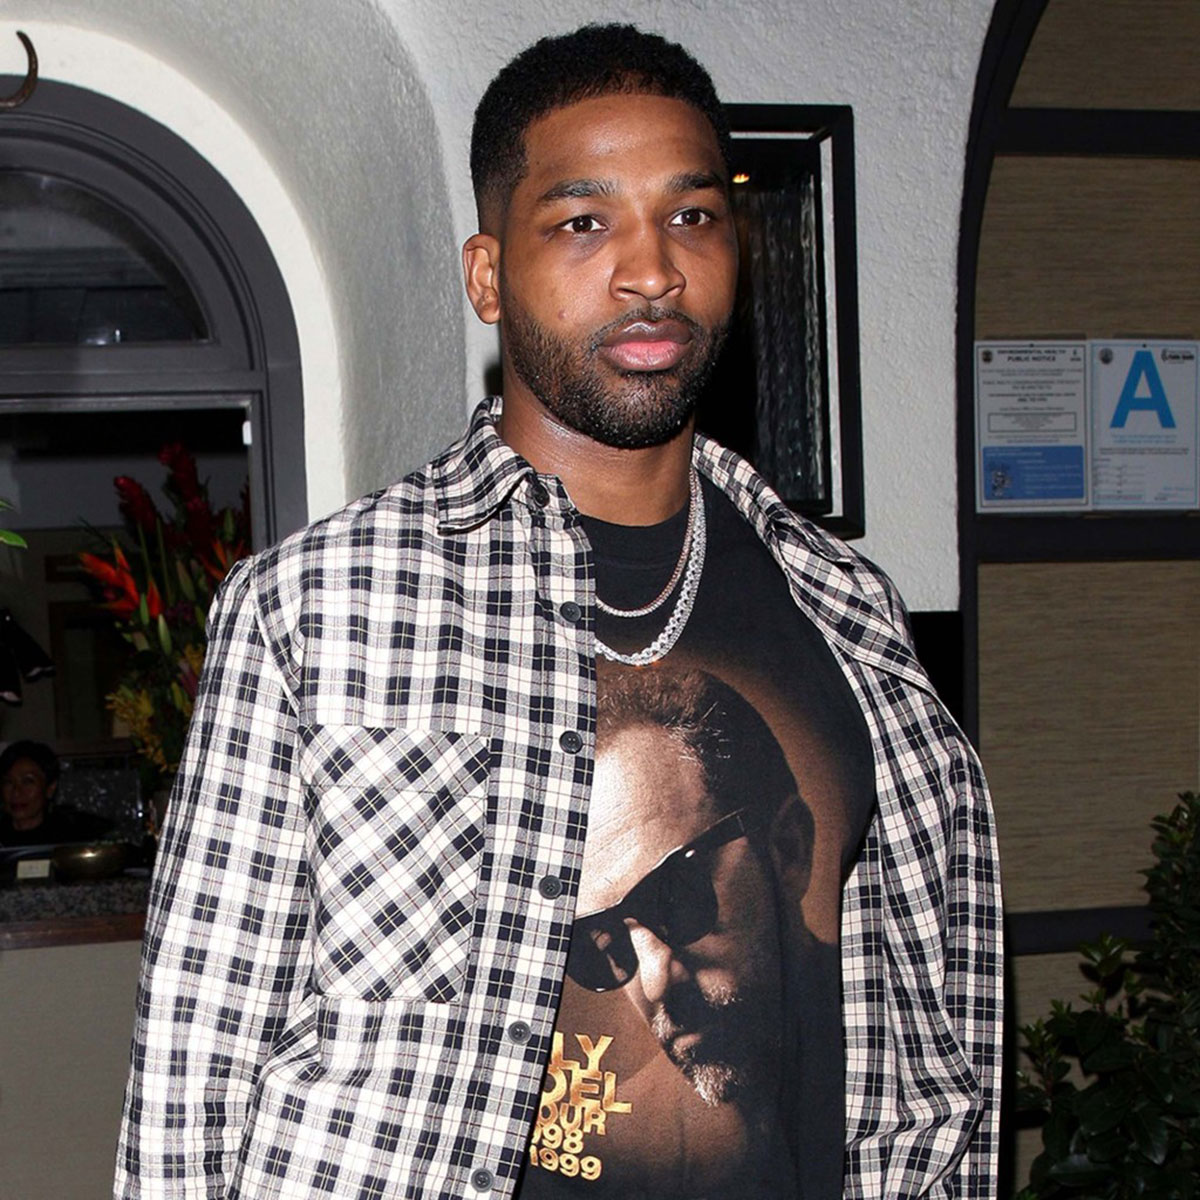 Tristan Thompson Used Snapchat to Contact Maralee Nichols Find Out His Username